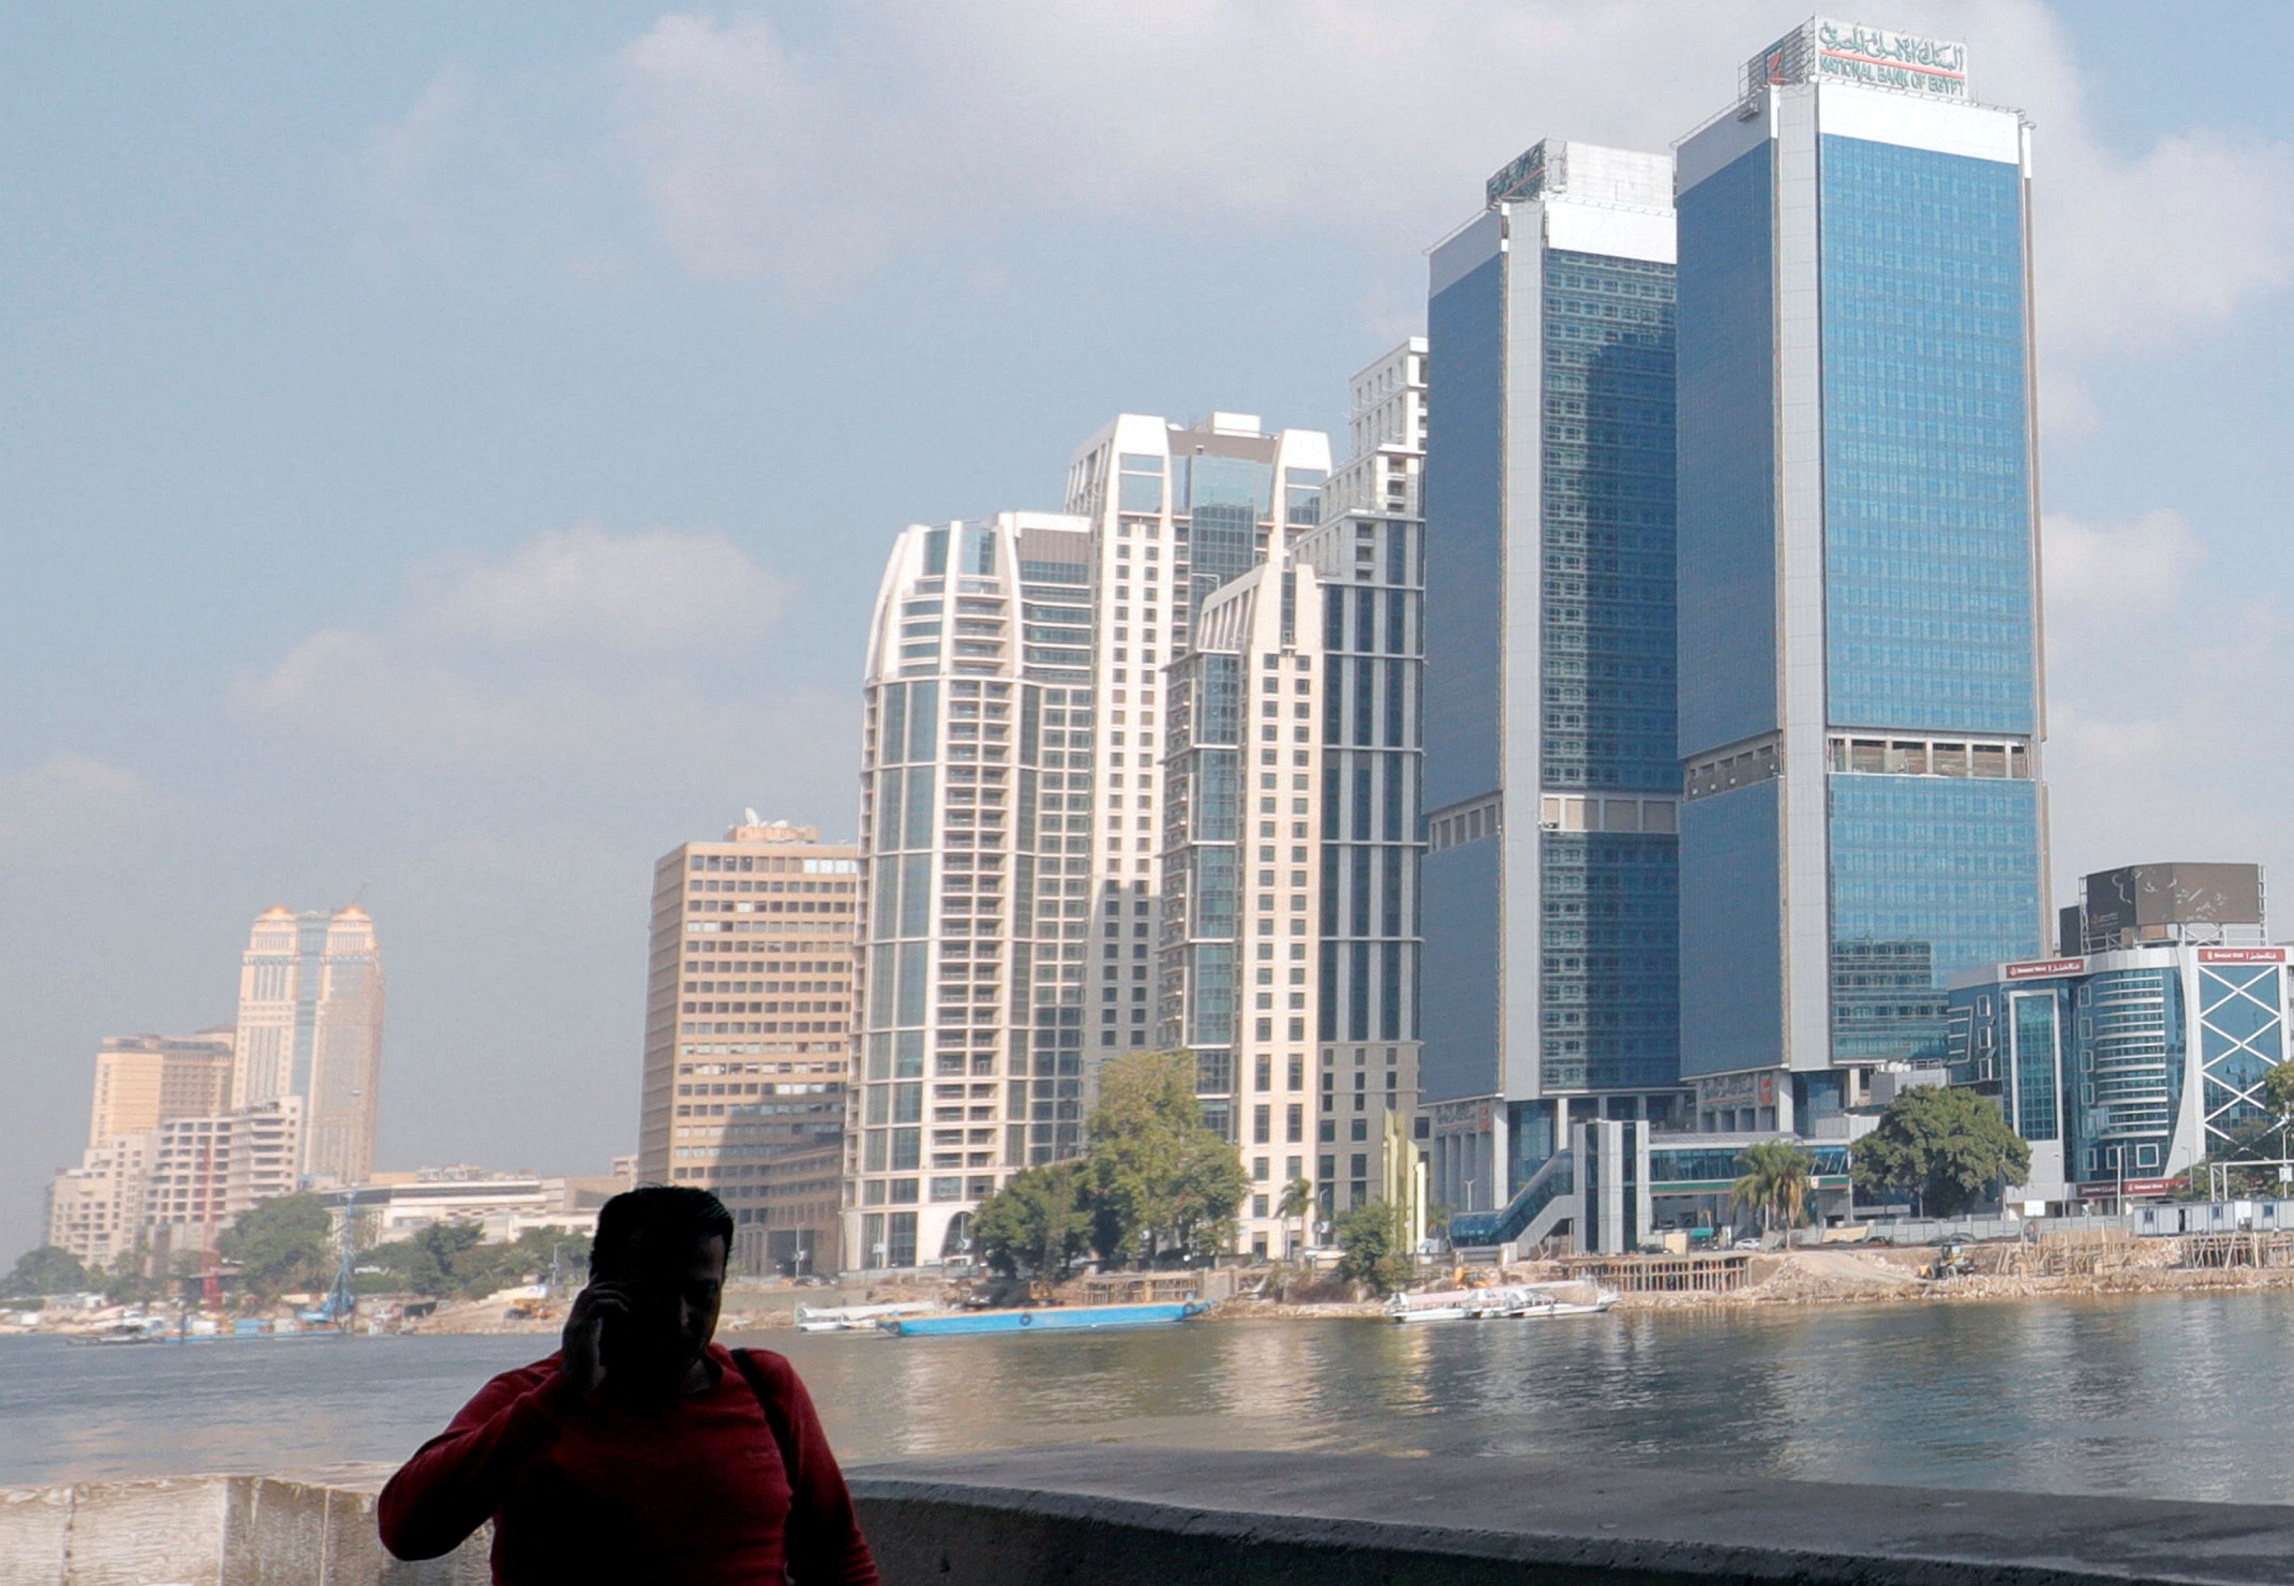 A man walks along the bank of the Nile river in front of high towers of hotels, banks and office buildings in Cairo